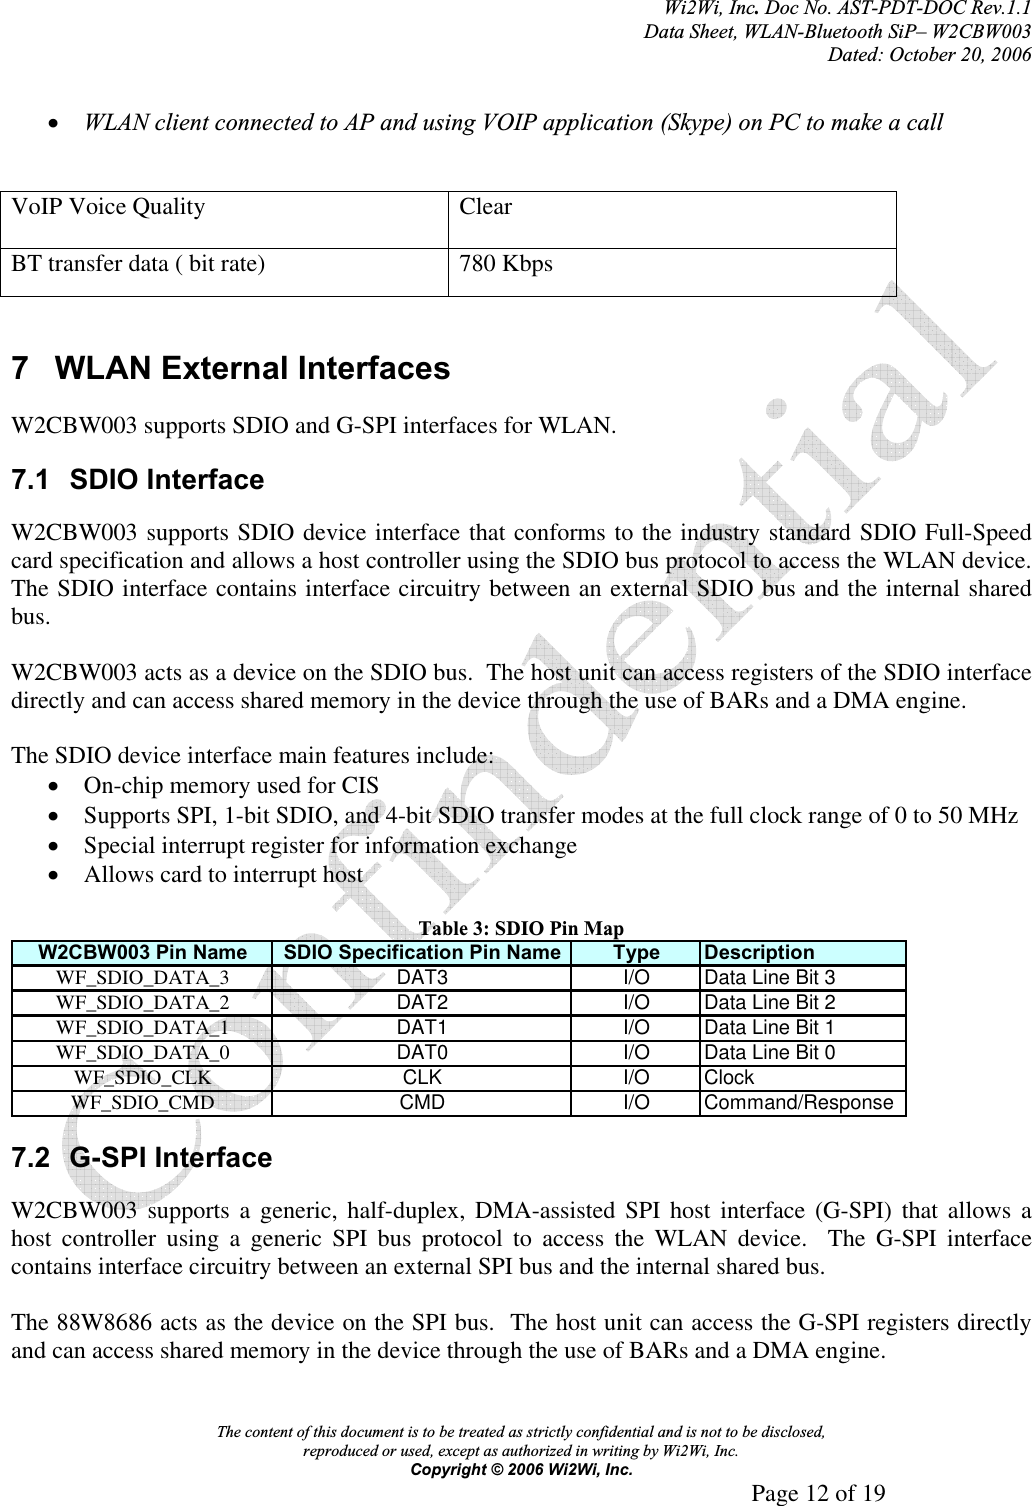 Wi2Wi, Inc.Doc No. AST-PDT-DOC Rev.1.1  Data Sheet, WLAN-Bluetooth SiP– W2CBW003 Dated: October 20, 2006 The content of this document is to be treated as strictly confidential and is not to be disclosed,  reproduced or used, except as authorized in writing by Wi2Wi, Inc.  Copyright © 2006 Wi2Wi, Inc.     Page 12 of 19   xWLAN client connected to AP and using VOIP application (Skype) on PC to make a call VoIP Voice Quality  Clear BT transfer data ( bit rate)  780 Kbps 7 WLAN External Interfaces W2CBW003 supports SDIO and G-SPI interfaces for WLAN. 7.1 SDIO Interface W2CBW003 supports SDIO device interface that conforms to the industry standard SDIO Full-Speed card specification and allows a host controller using the SDIO bus protocol to access the WLAN device.  The SDIO interface contains interface circuitry between an external SDIO bus and the internal shared bus.W2CBW003 acts as a device on the SDIO bus.  The host unit can access registers of the SDIO interface directly and can access shared memory in the device through the use of BARs and a DMA engine. The SDIO device interface main features include: xOn-chip memory used for CIS xSupports SPI, 1-bit SDIO, and 4-bit SDIO transfer modes at the full clock range of 0 to 50 MHz xSpecial interrupt register for information exchange xAllows card to interrupt host Table 3: SDIO Pin Map W2CBW003 Pin Name SDIO Specification Pin Name Type DescriptionWF_SDIO_DATA_3 DAT3 I/O Data Line Bit 3WF_SDIO_DATA_2 DAT2 I/O Data Line Bit 2WF_SDIO_DATA_1 DAT1 I/O Data Line Bit 1WF_SDIO_DATA_0 DAT0 I/O Data Line Bit 0WF_SDIO_CLK CLK I/O ClockWF_SDIO_CMD CMD I/O Command/Response7.2 G-SPI Interface W2CBW003 supports a generic, half-duplex, DMA-assisted SPI host interface (G-SPI) that allows a host controller using a generic SPI bus protocol to access the WLAN device.  The G-SPI interface contains interface circuitry between an external SPI bus and the internal shared bus. The 88W8686 acts as the device on the SPI bus.  The host unit can access the G-SPI registers directly and can access shared memory in the device through the use of BARs and a DMA engine. 